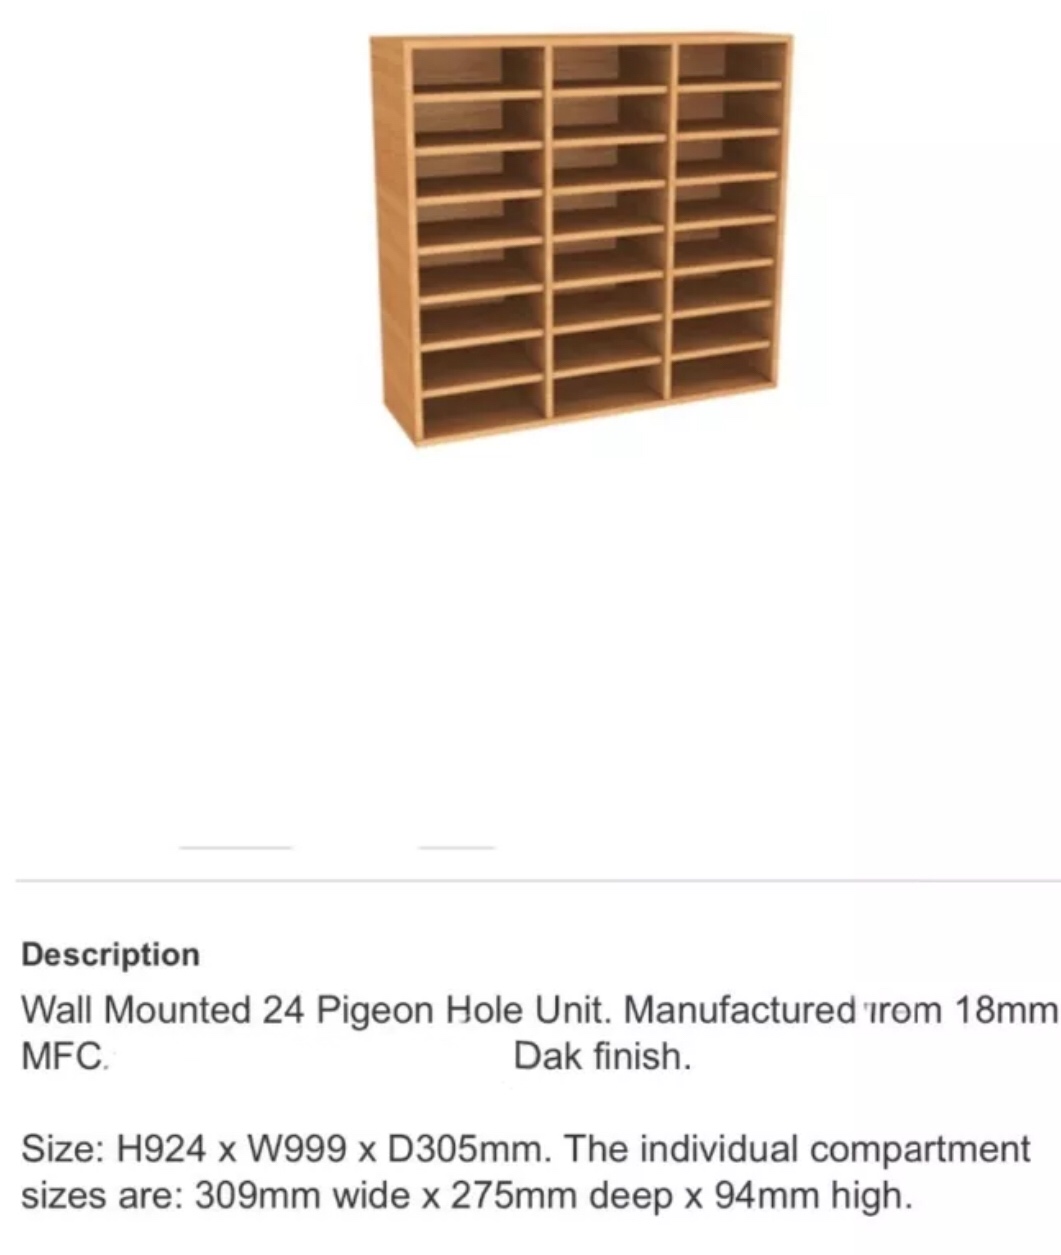 Pigeon hole storage with 24 openings - oak MFC 